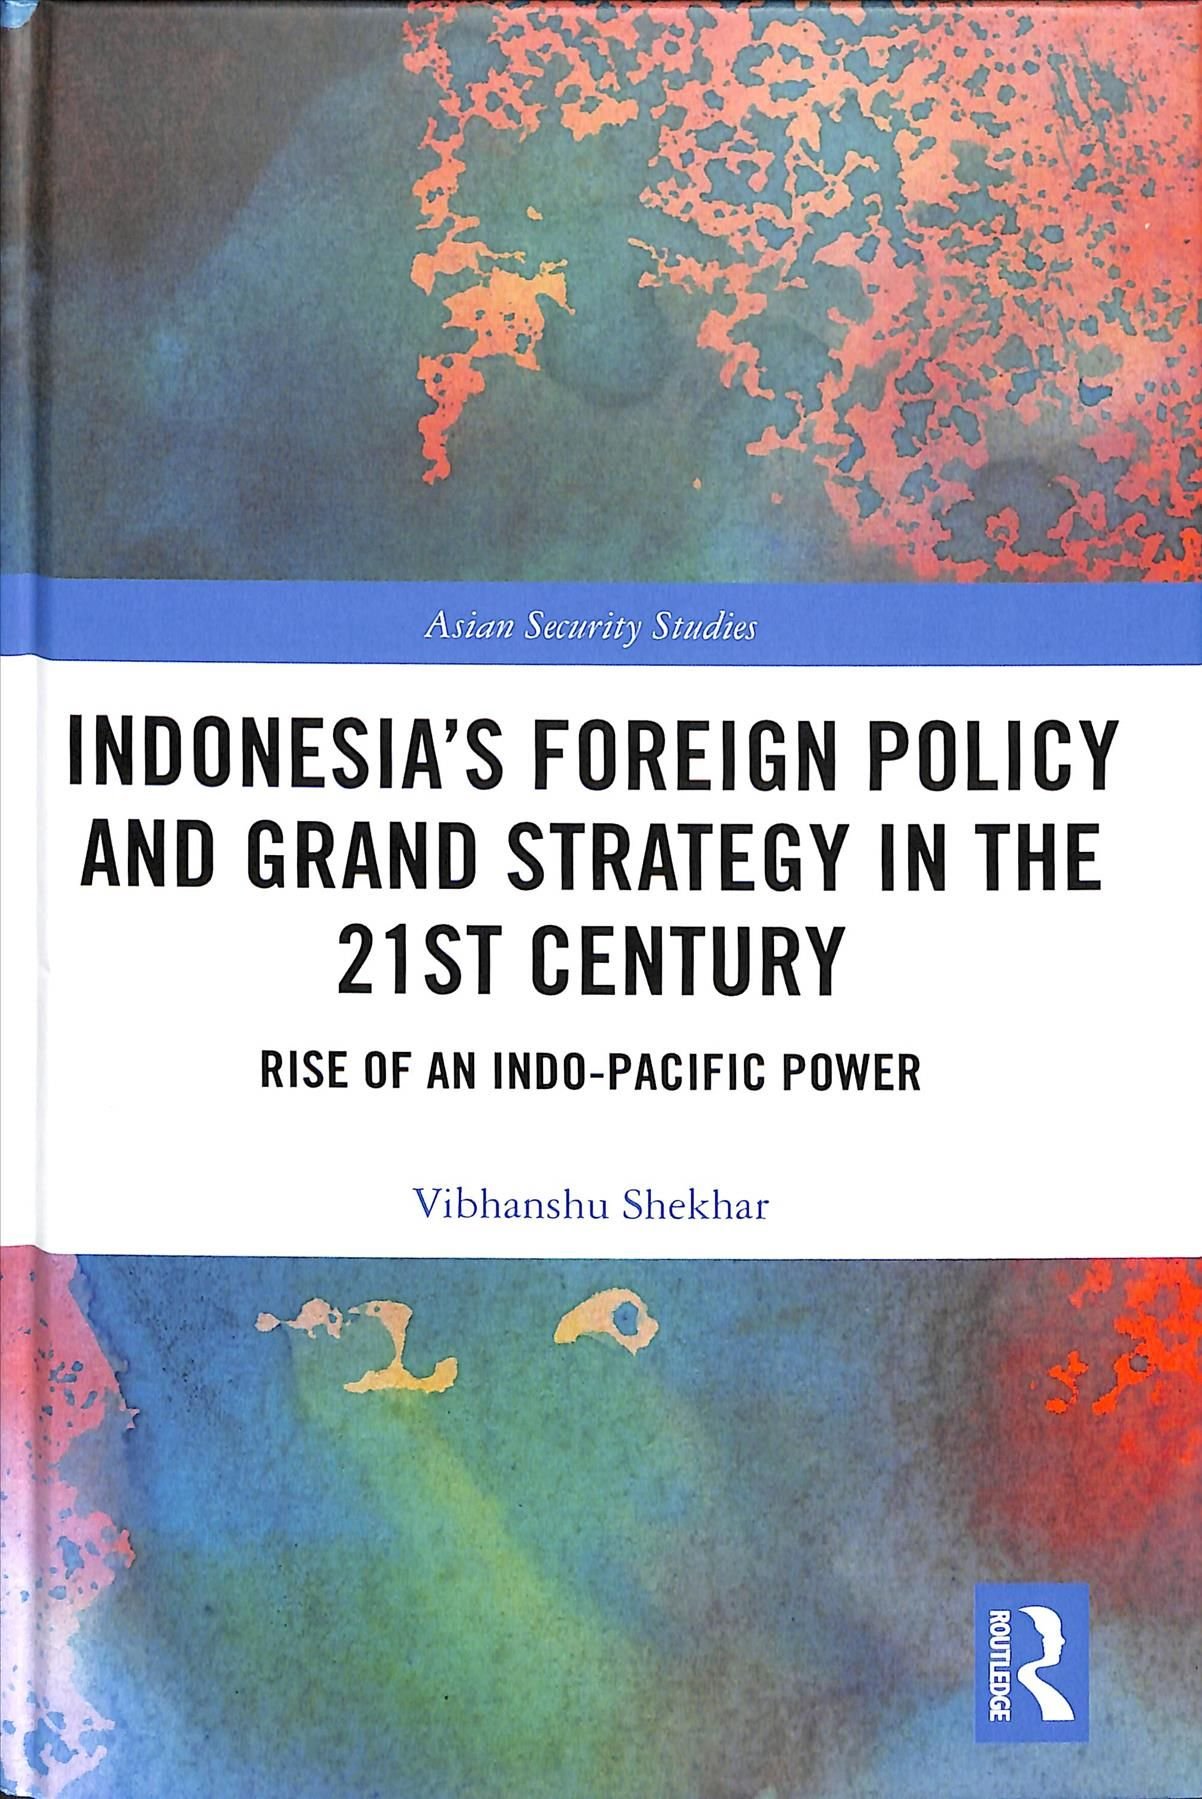 Indonesia's Foreign Policy and Grand Strategy in the 21st Century